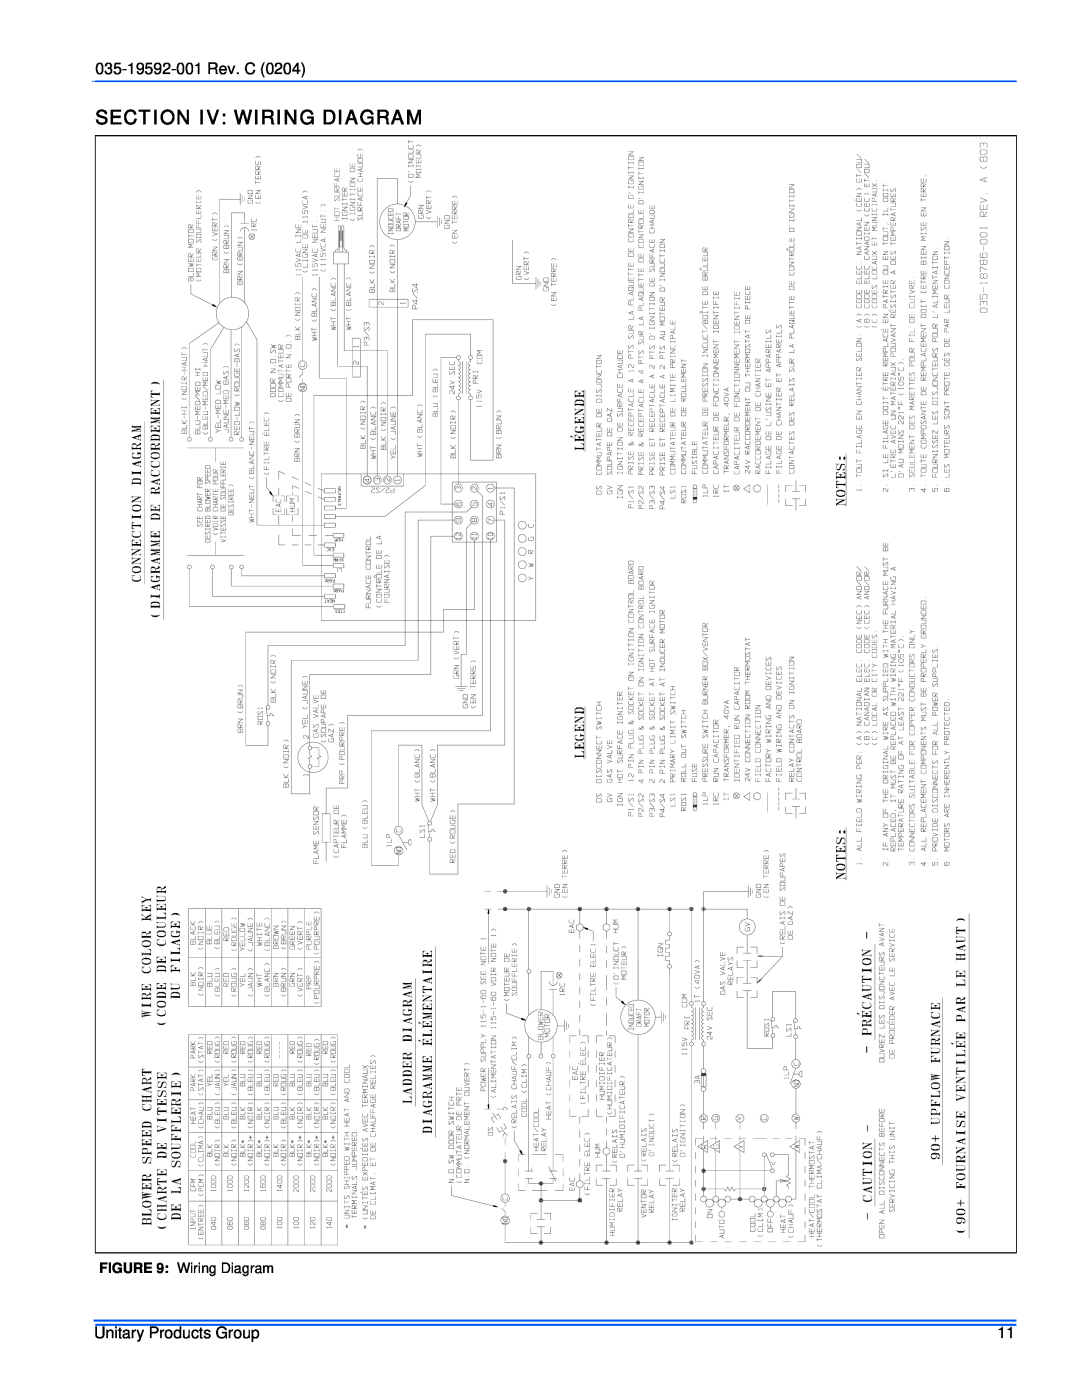 White Rodgers FG9, G9T service manual Section Iv Wiring Diagram, 035-19592-001Rev. C, Unitary Products Group 